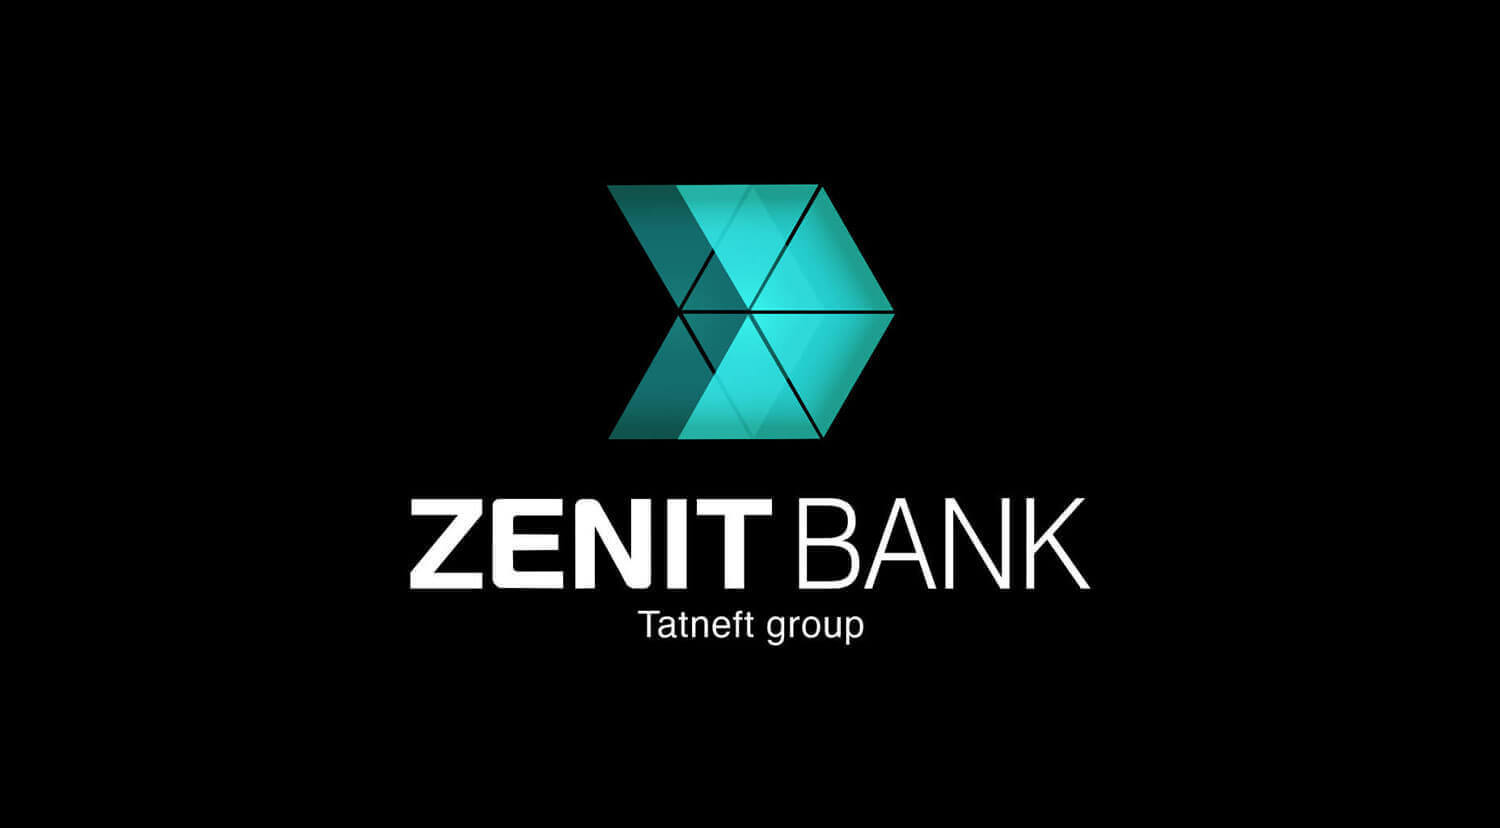 Zenit Bank Russia, Retail Brand Identity, Graphic Communications - Campbell Rigg Agency